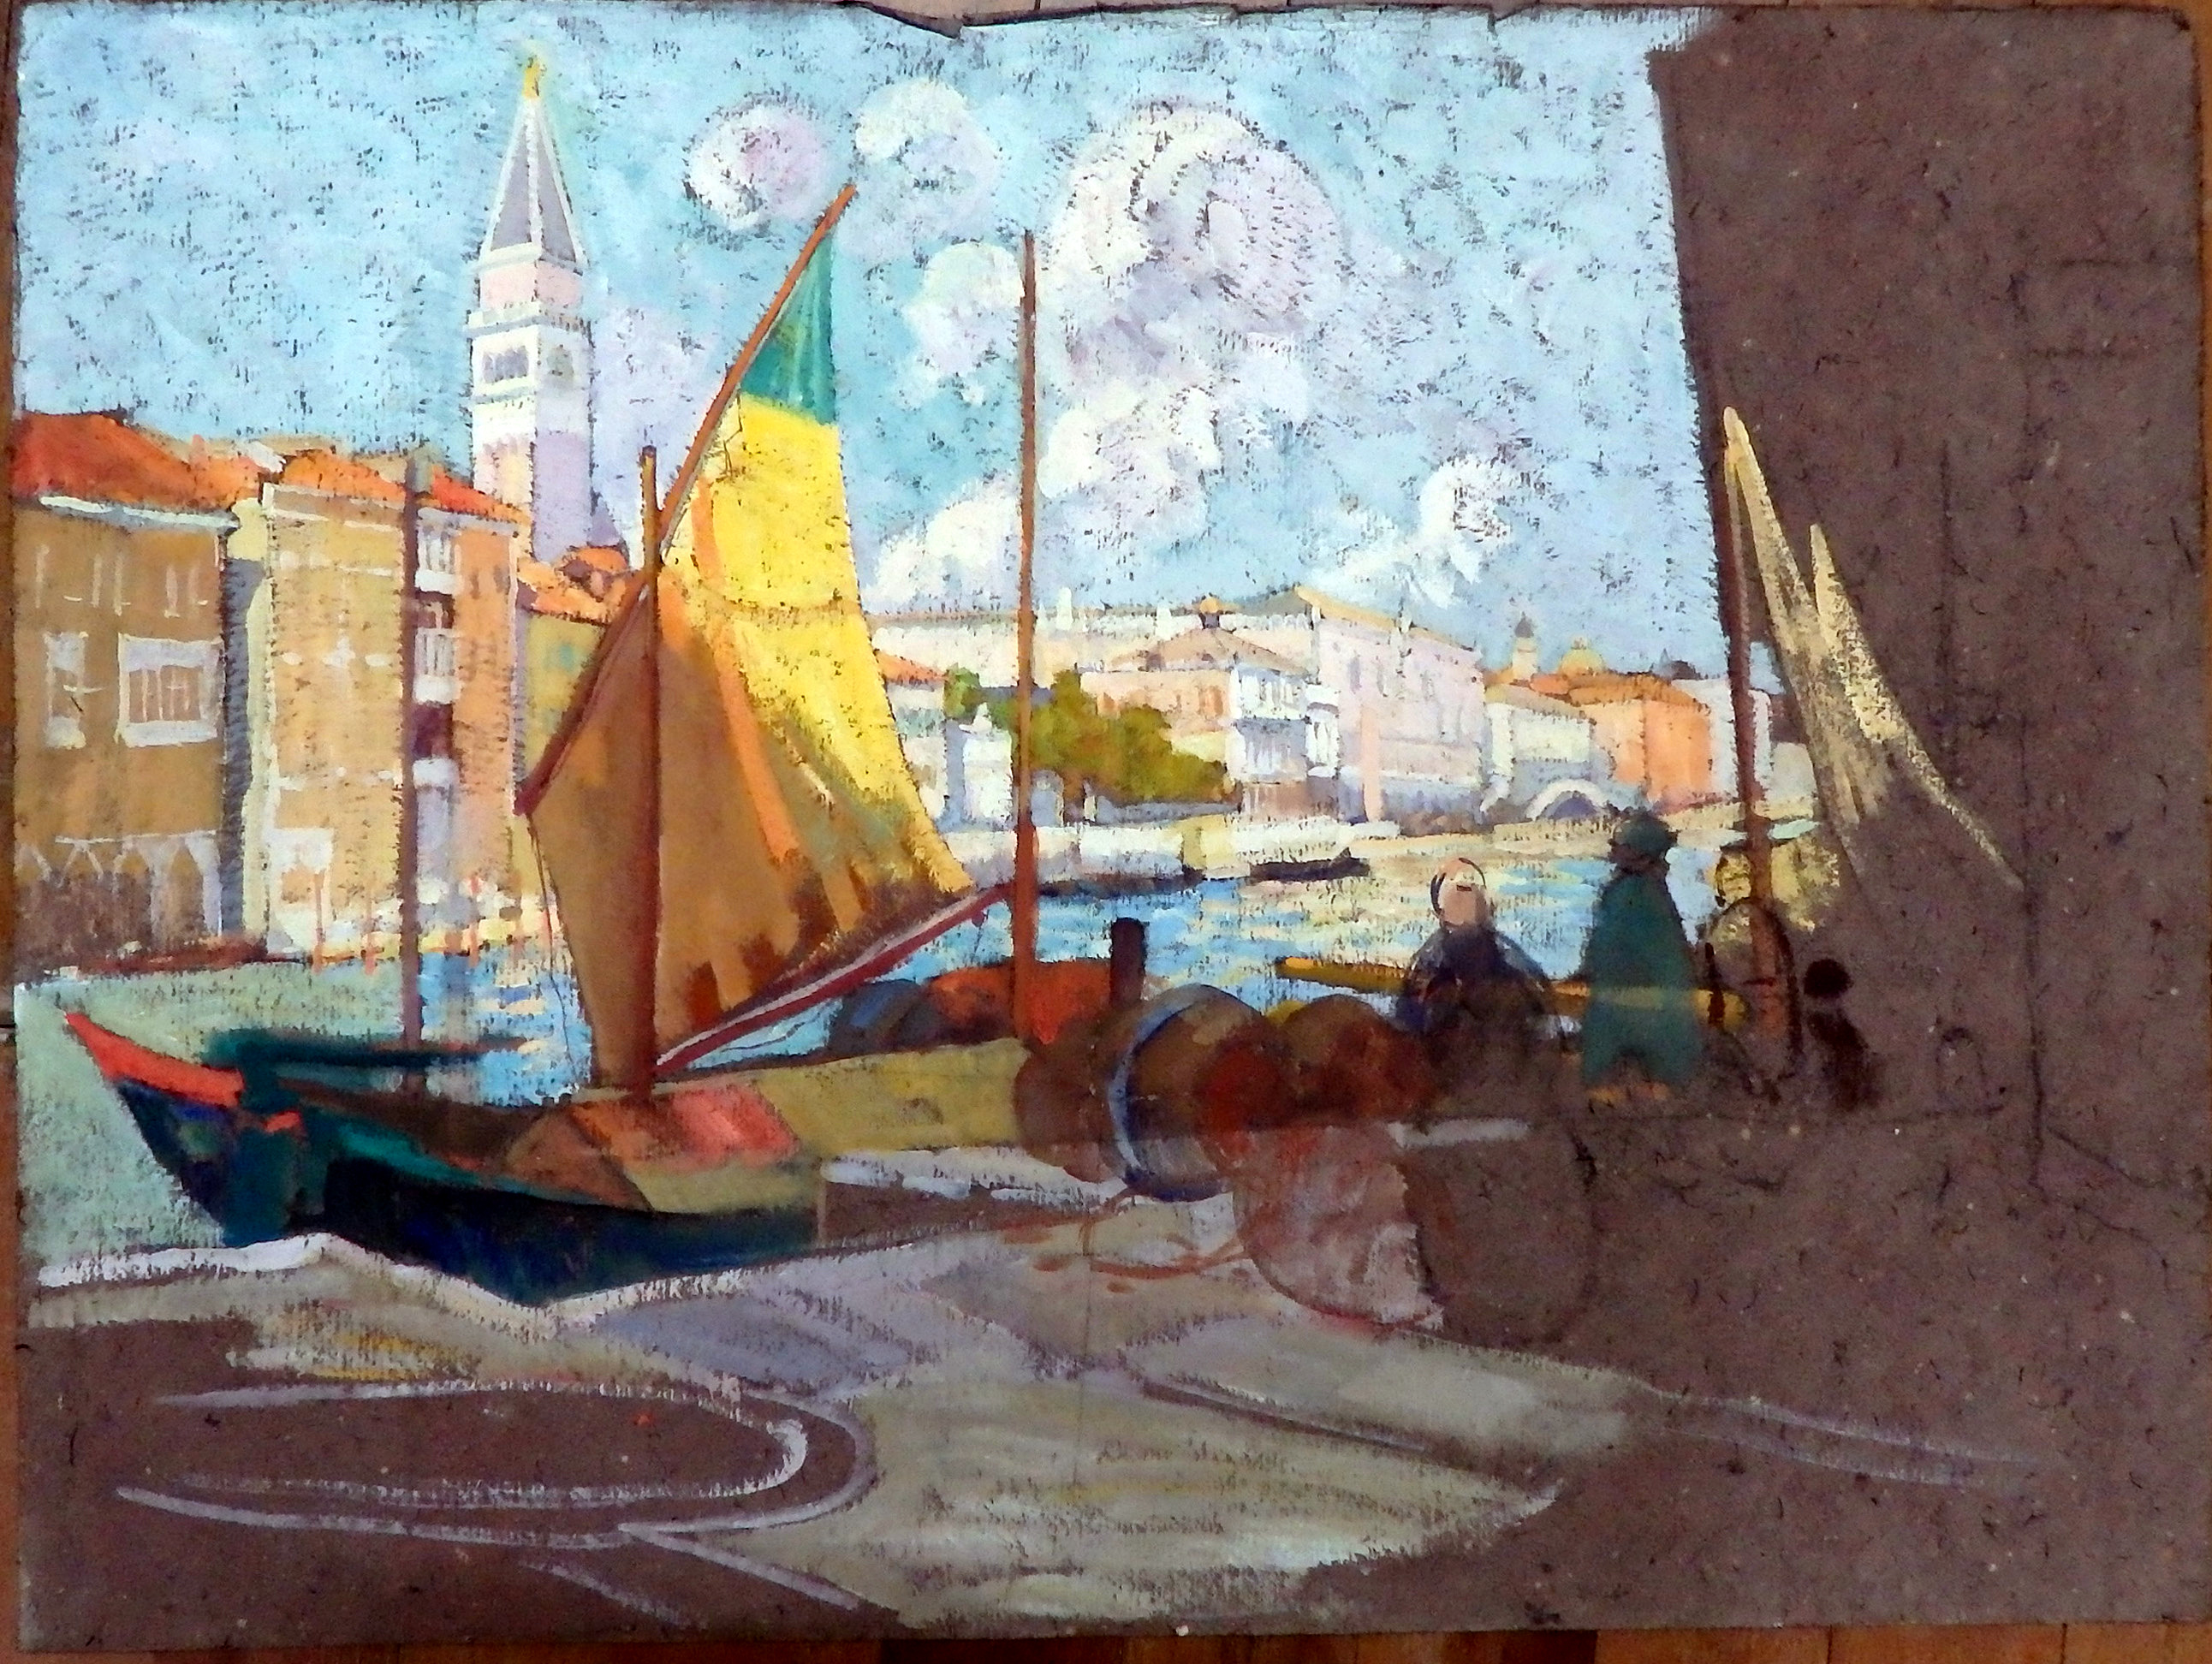 Evelyn Chapman, Untitled (Venetian Scene), 1920, tempera and watercolour, 56 x 75cm. MAG&M collection. Gift of Pamela Thalben-Ball, 2009